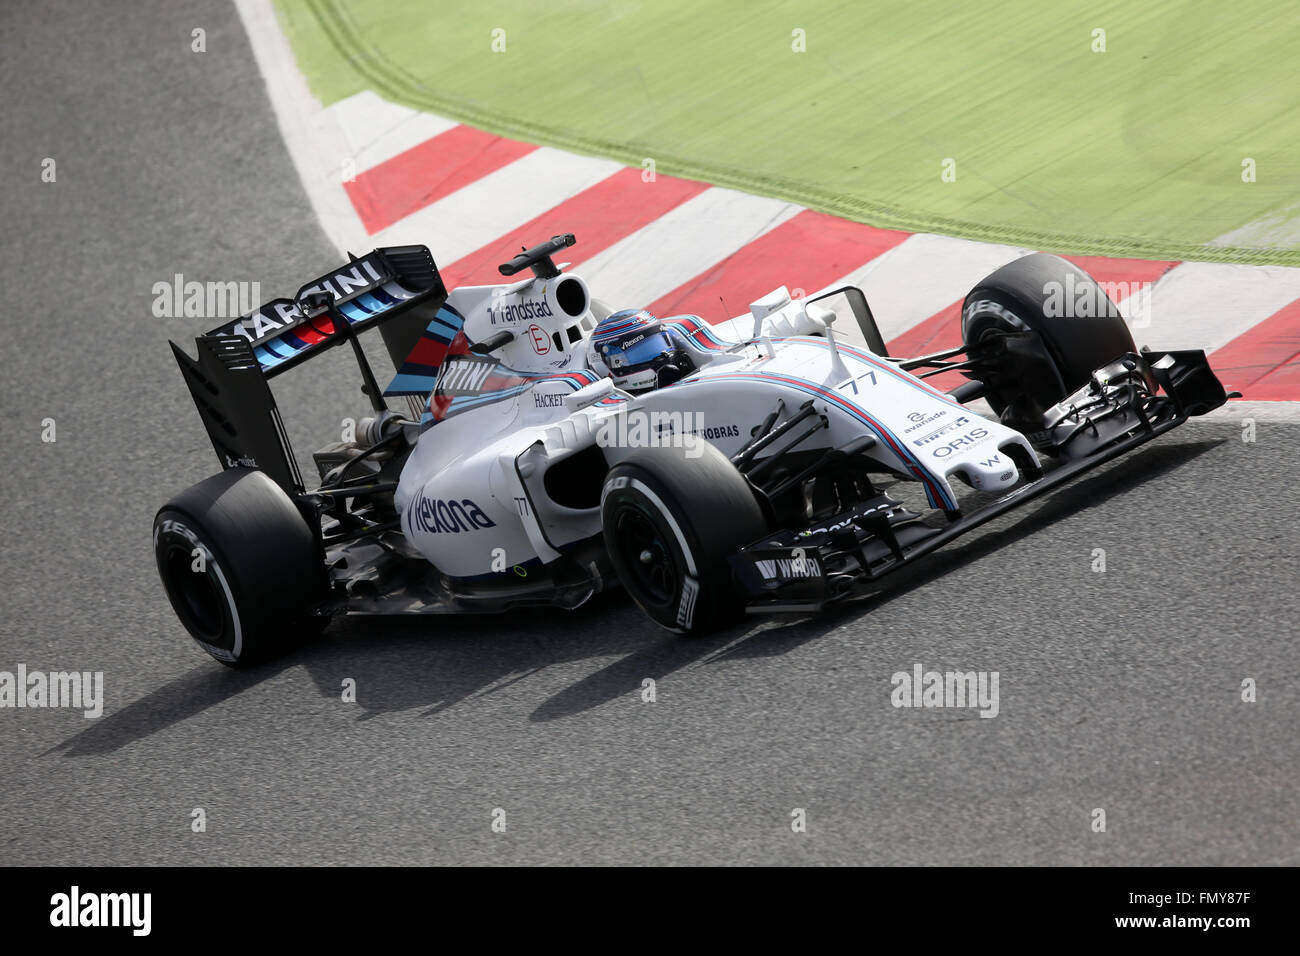 Finnish Formula One driver Valtteri Bottas of Williams steers the new car during a training session for the upcoming Formula One season at the Circuit de Barcelona - Catalunya in Barcelona, Spain, 22 February 2016. Photo: Jens Buettner/dpa Stock Photo